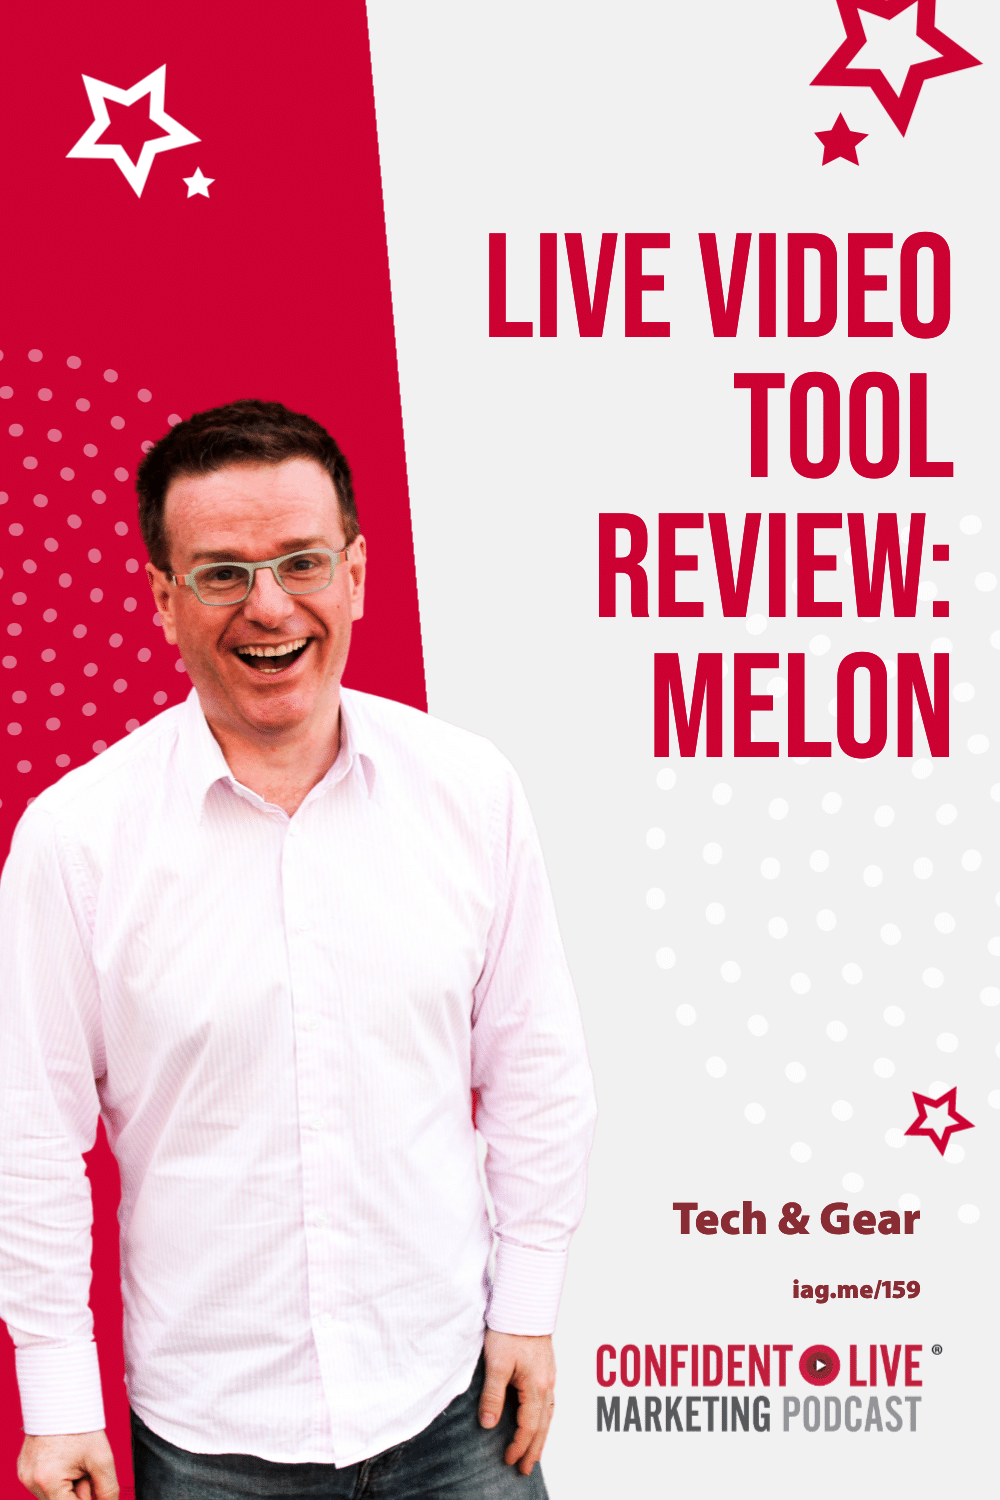 Live Video Tool Review: Melon